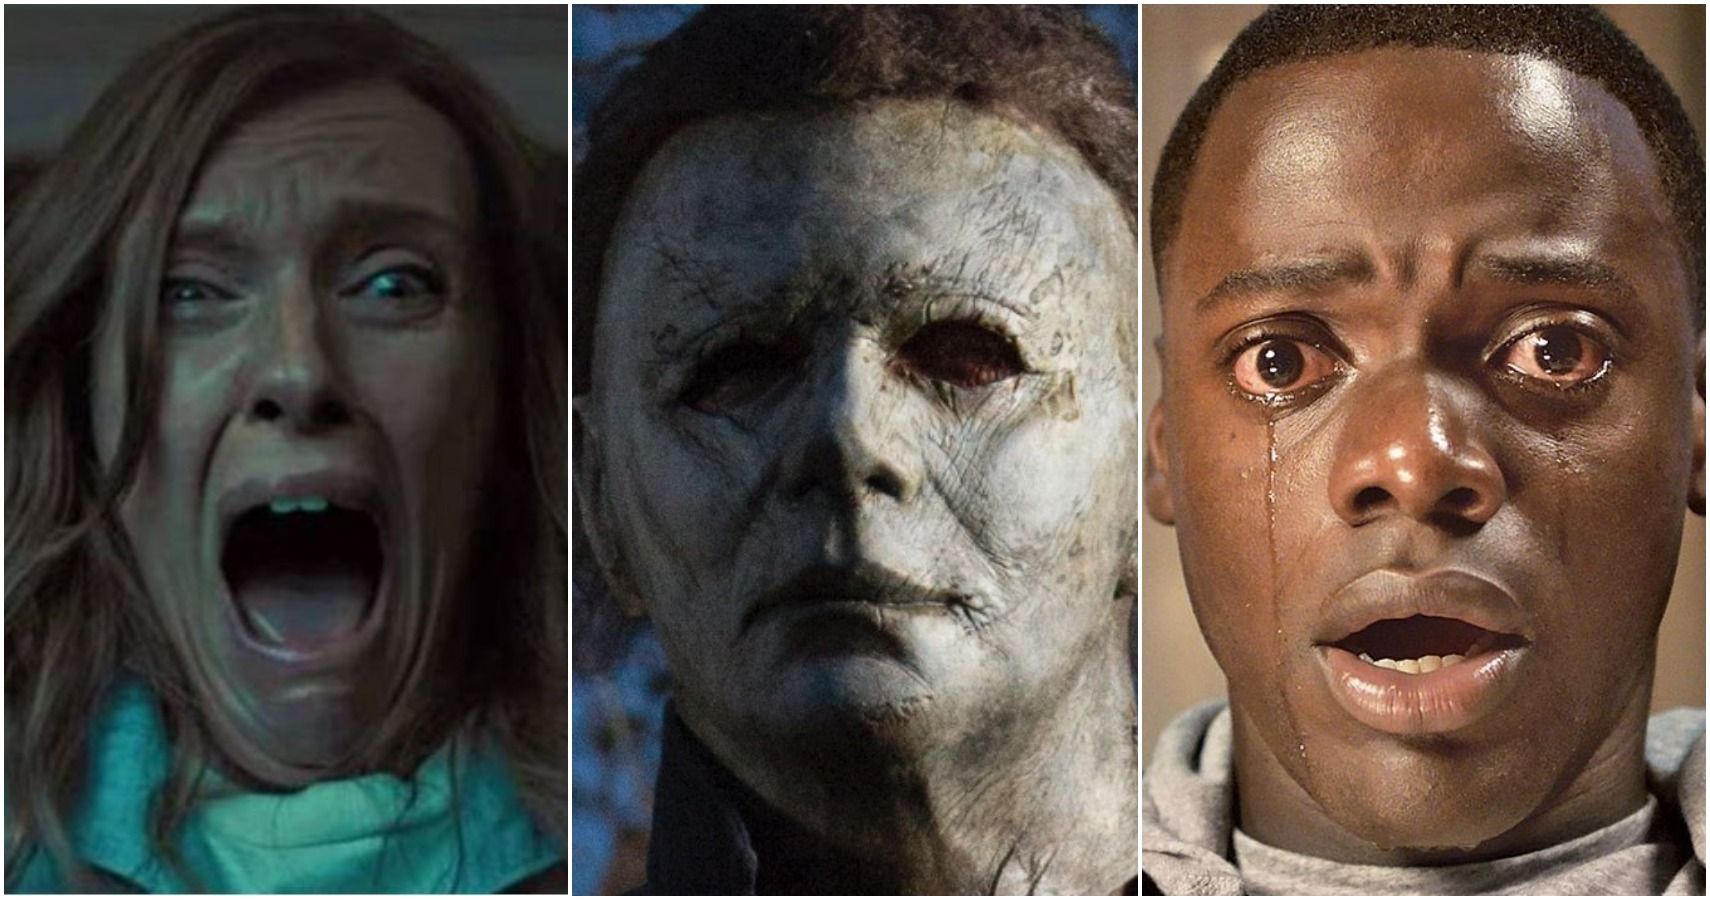 The 10 Best Horror Movies Of The Last Five Years According To Reddit